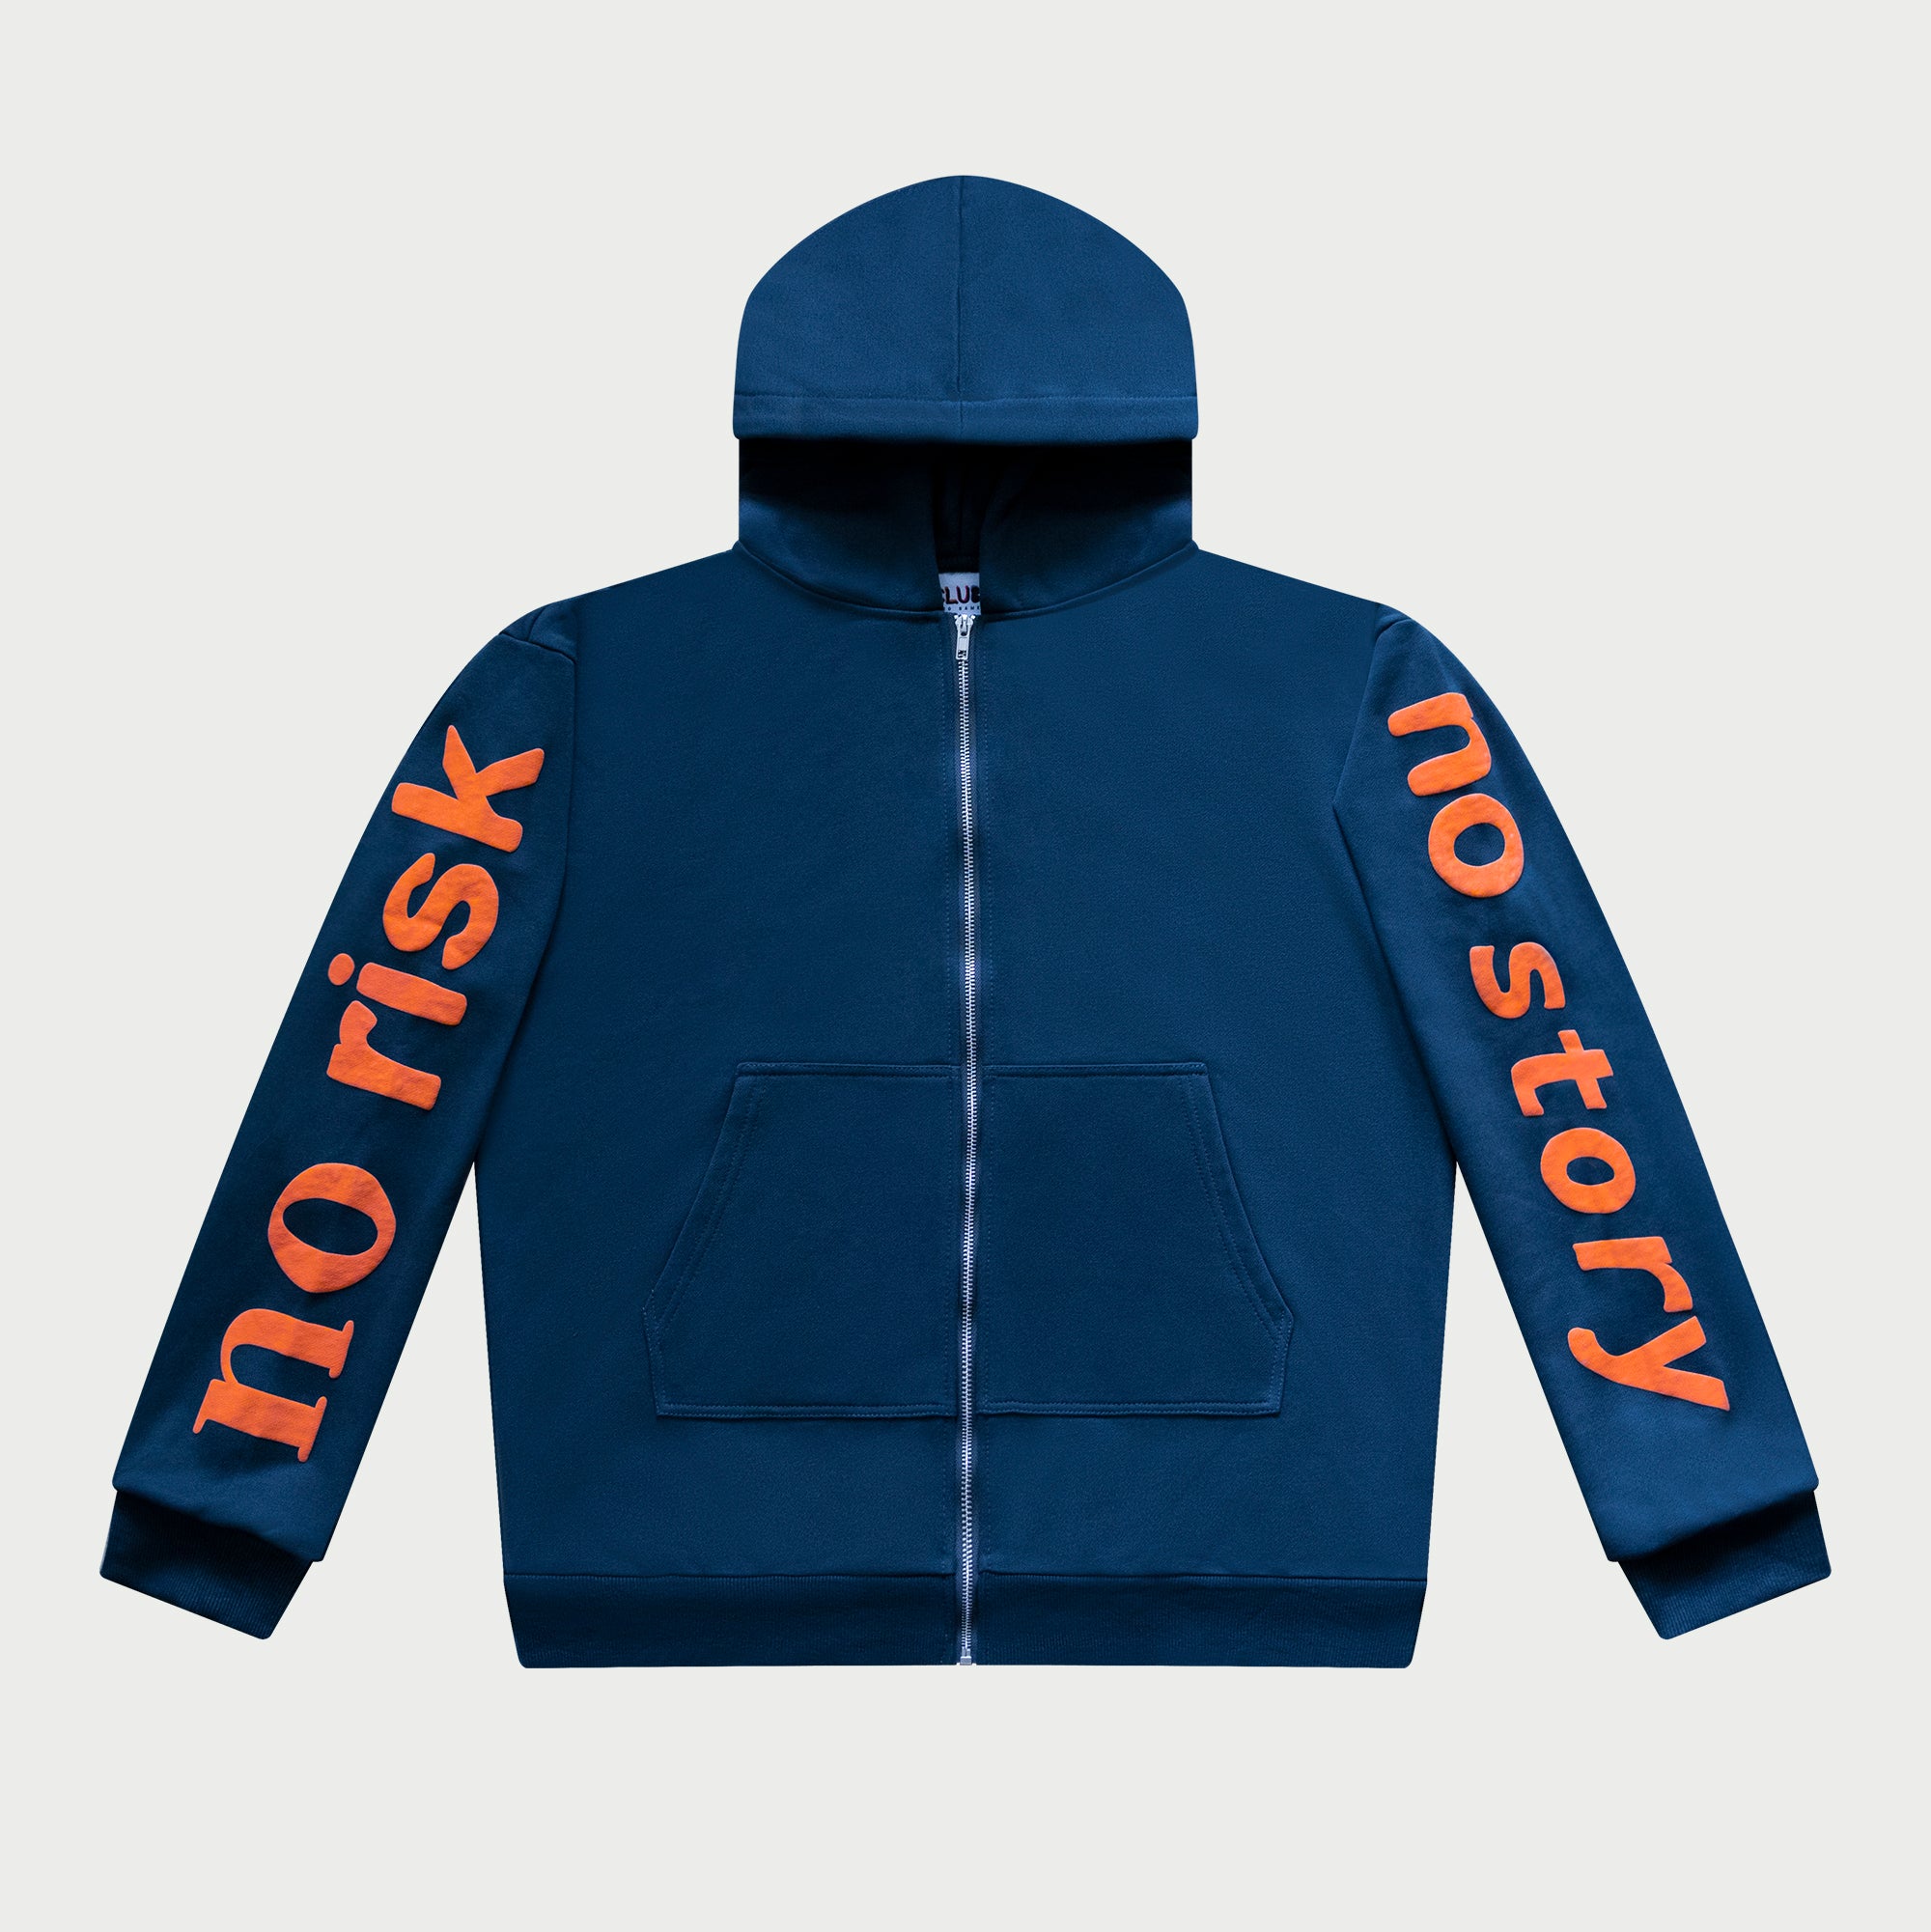 No Risk No Story Zip Up - Space Blue